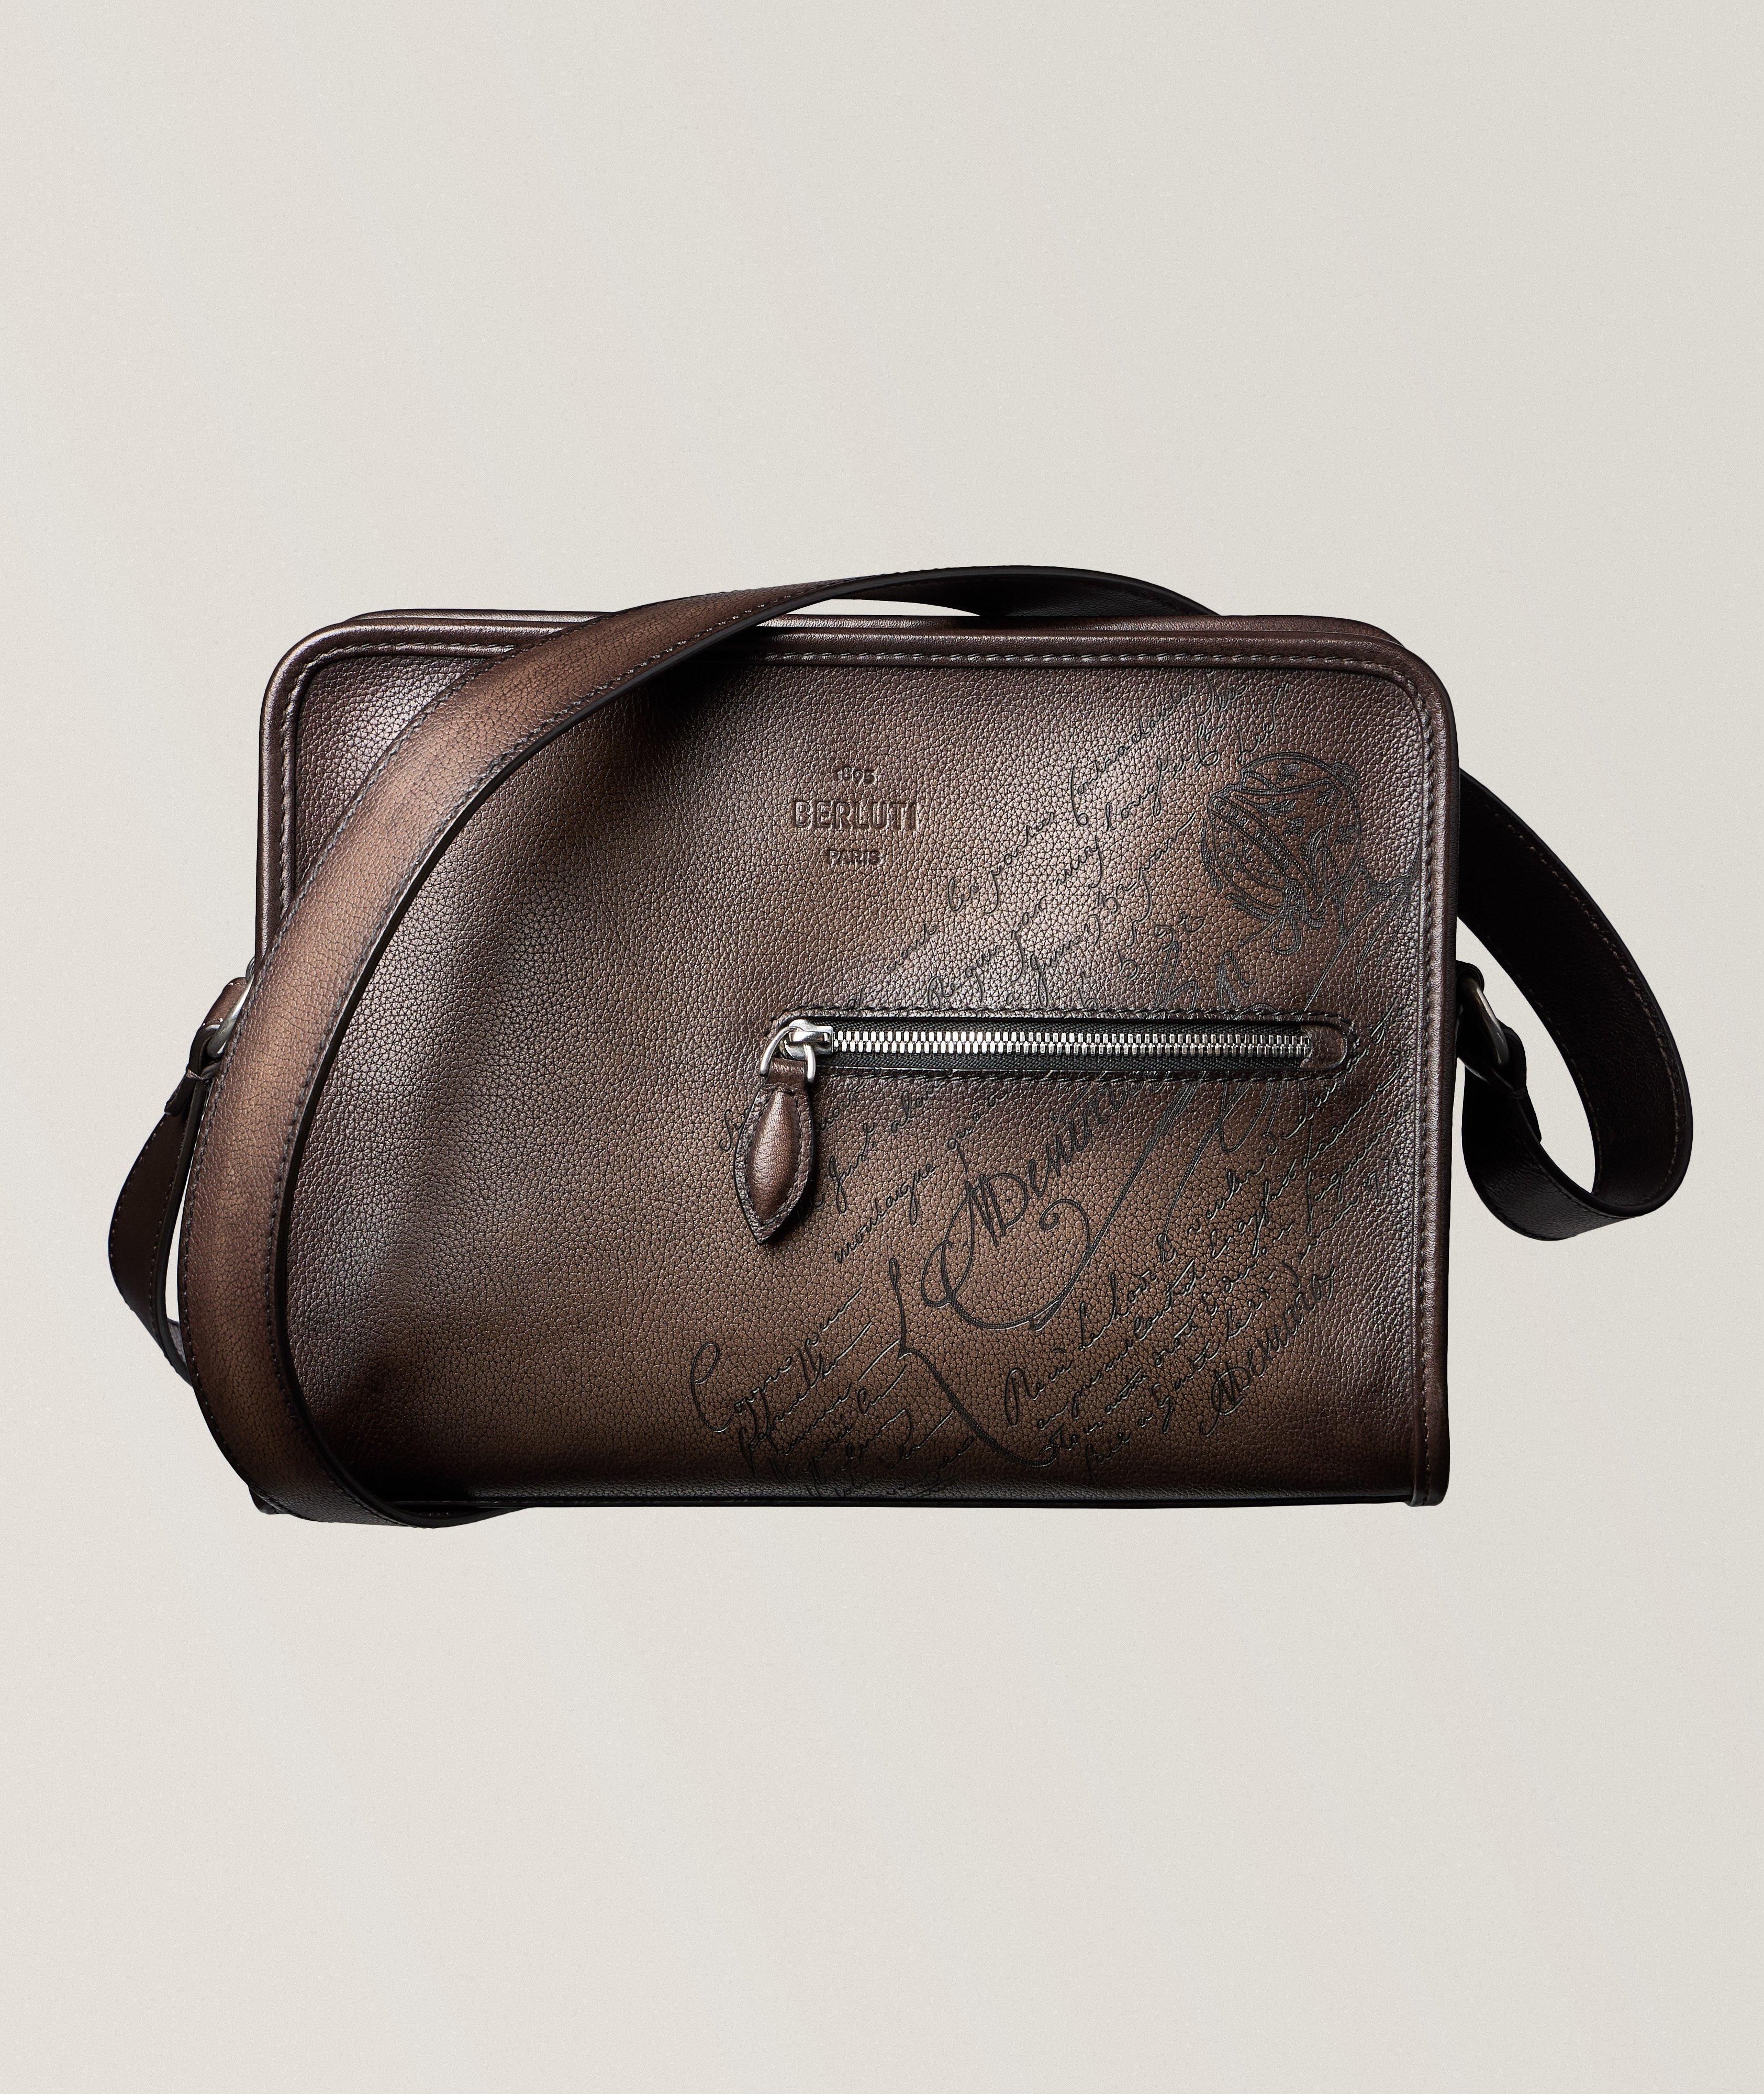 Soft Grained Leather Journalier Bag image 0